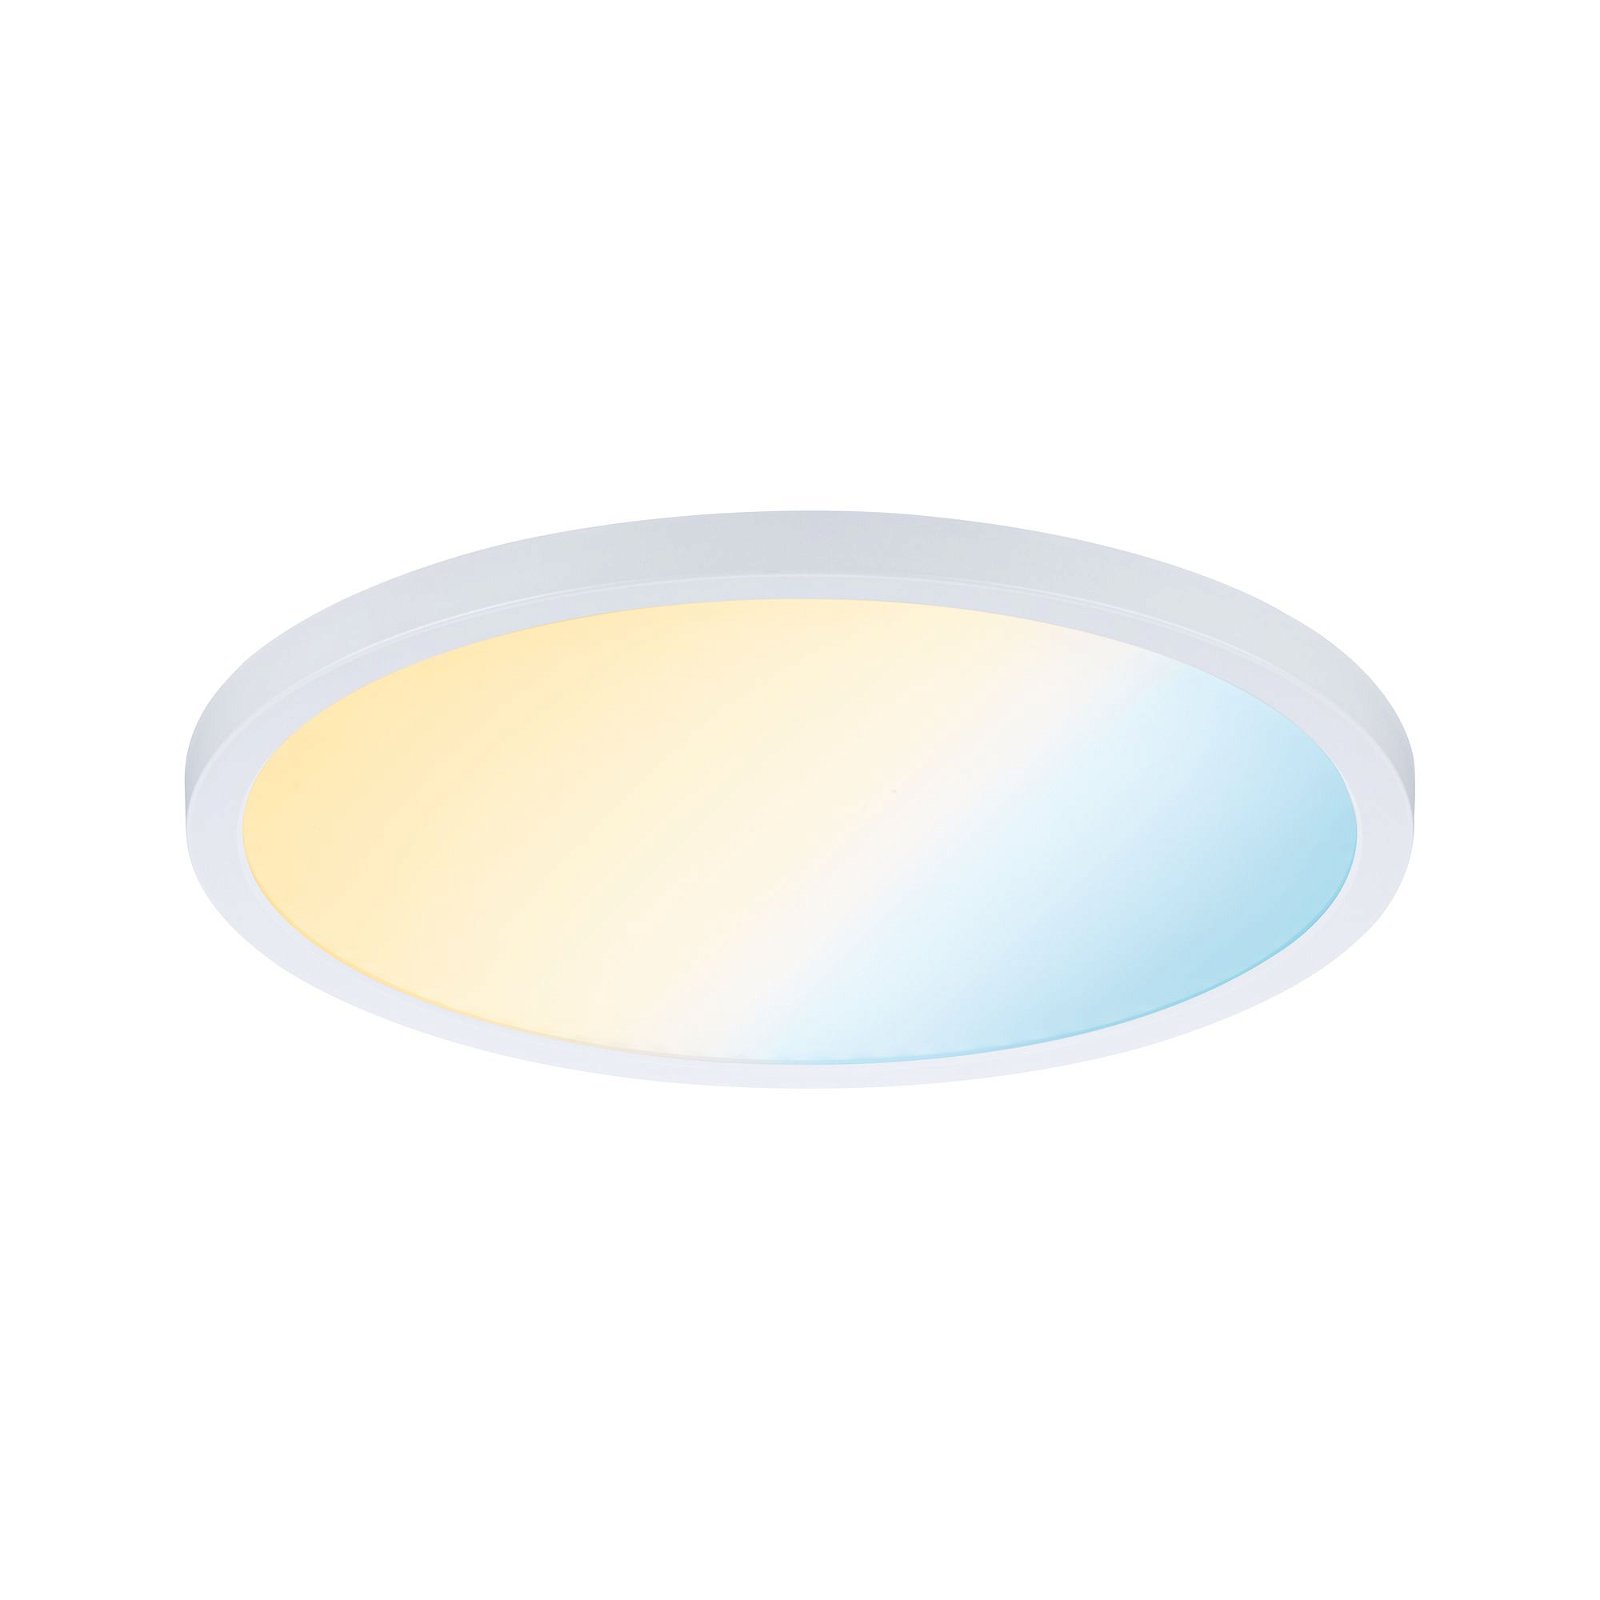 VariFit LED Recessed panel Smart Home Zigbee Areo IP44 round 230mm Tunable White White dimmable